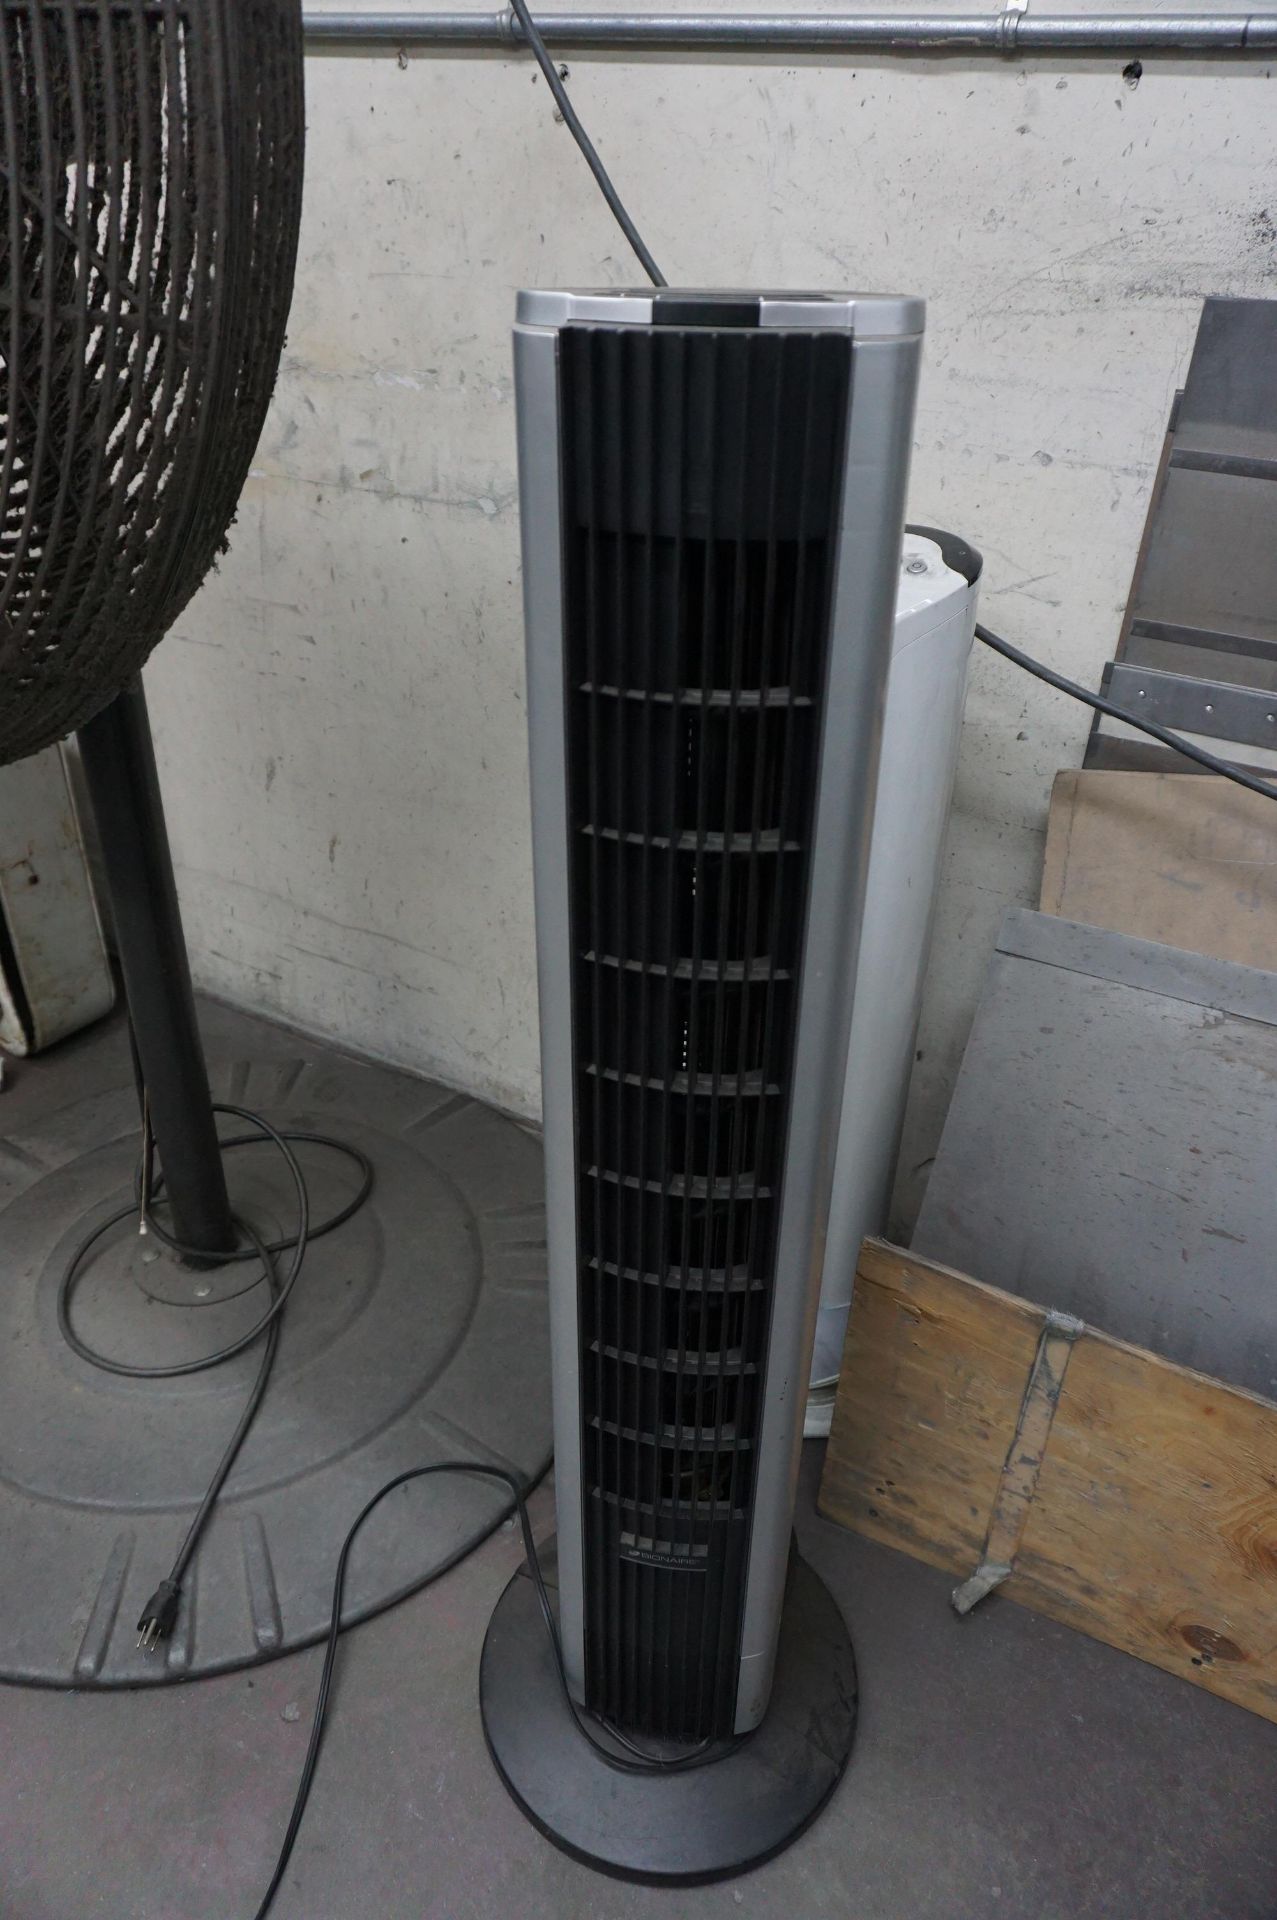 FAN LOT TO INCLUDE BUT NOT LIMITED TO: DAYTON INDUSTRIAL FAN, BIONAIRE TOWER FAN, HONEYWELL TOWER - Image 2 of 5